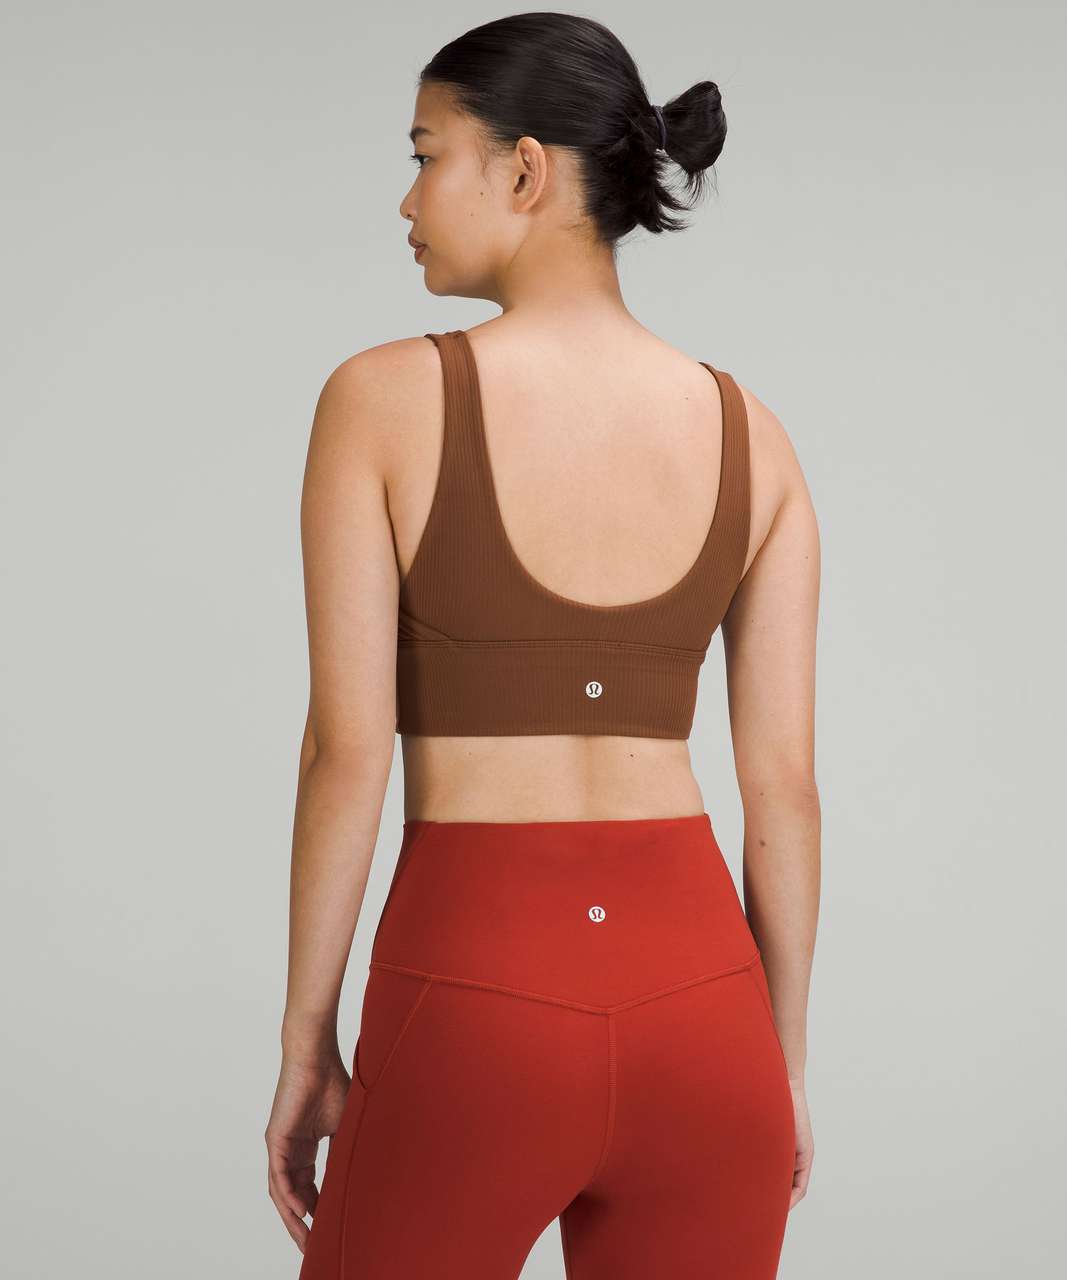 Lululemon Align Ribbed Bra *Light Support, A/B Cup - Roasted Brown / Roasted Brown